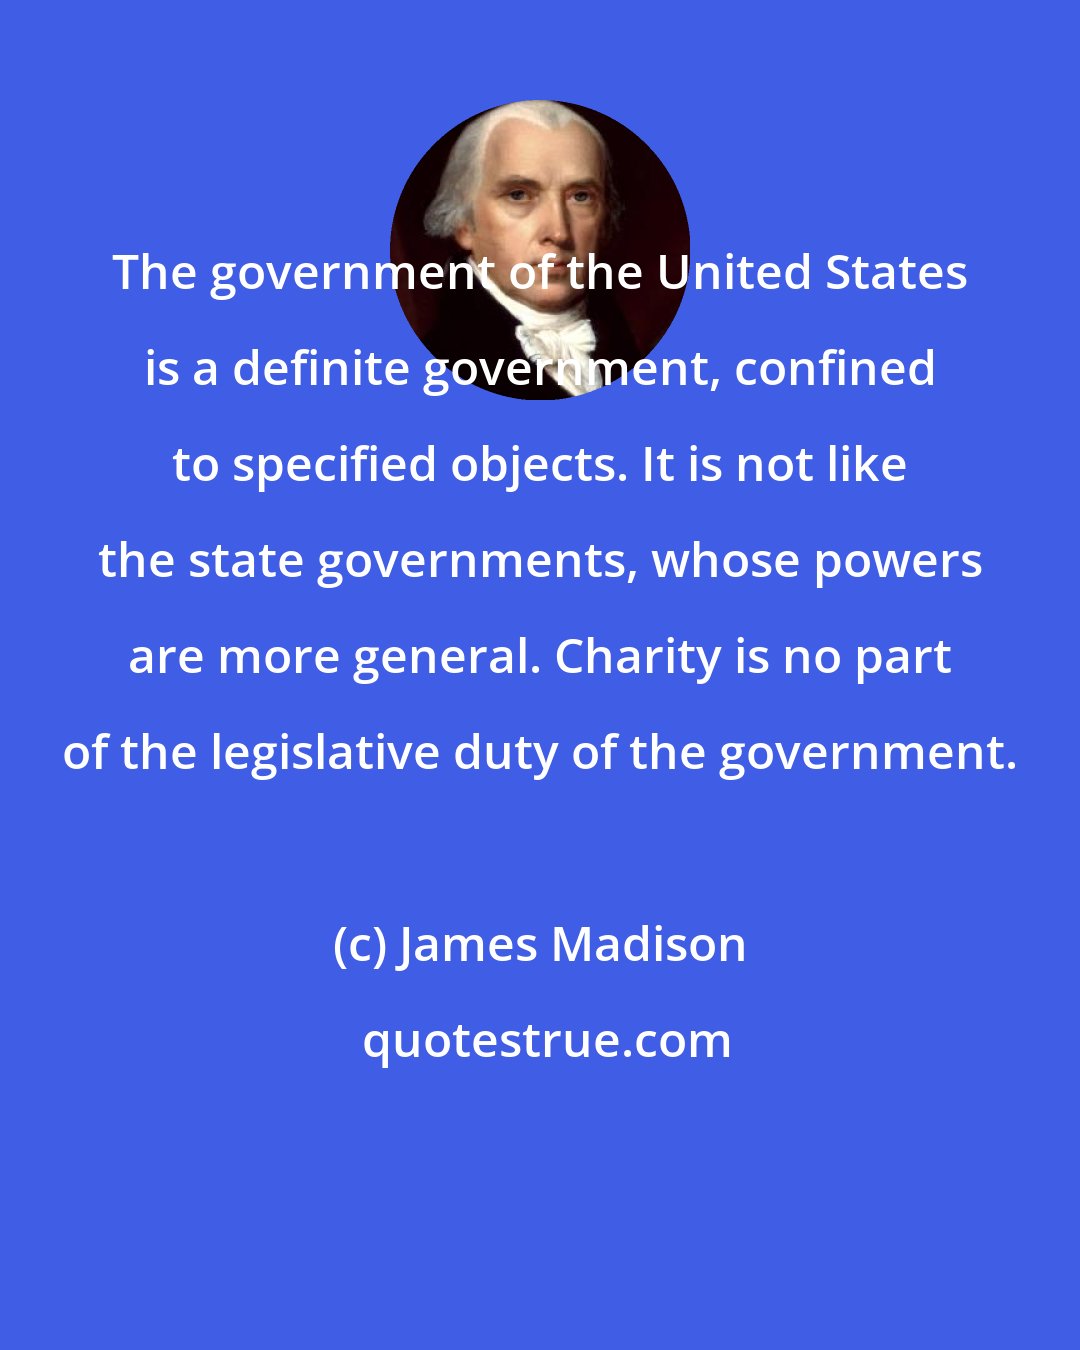 James Madison: The government of the United States is a definite government, confined to specified objects. It is not like the state governments, whose powers are more general. Charity is no part of the legislative duty of the government.